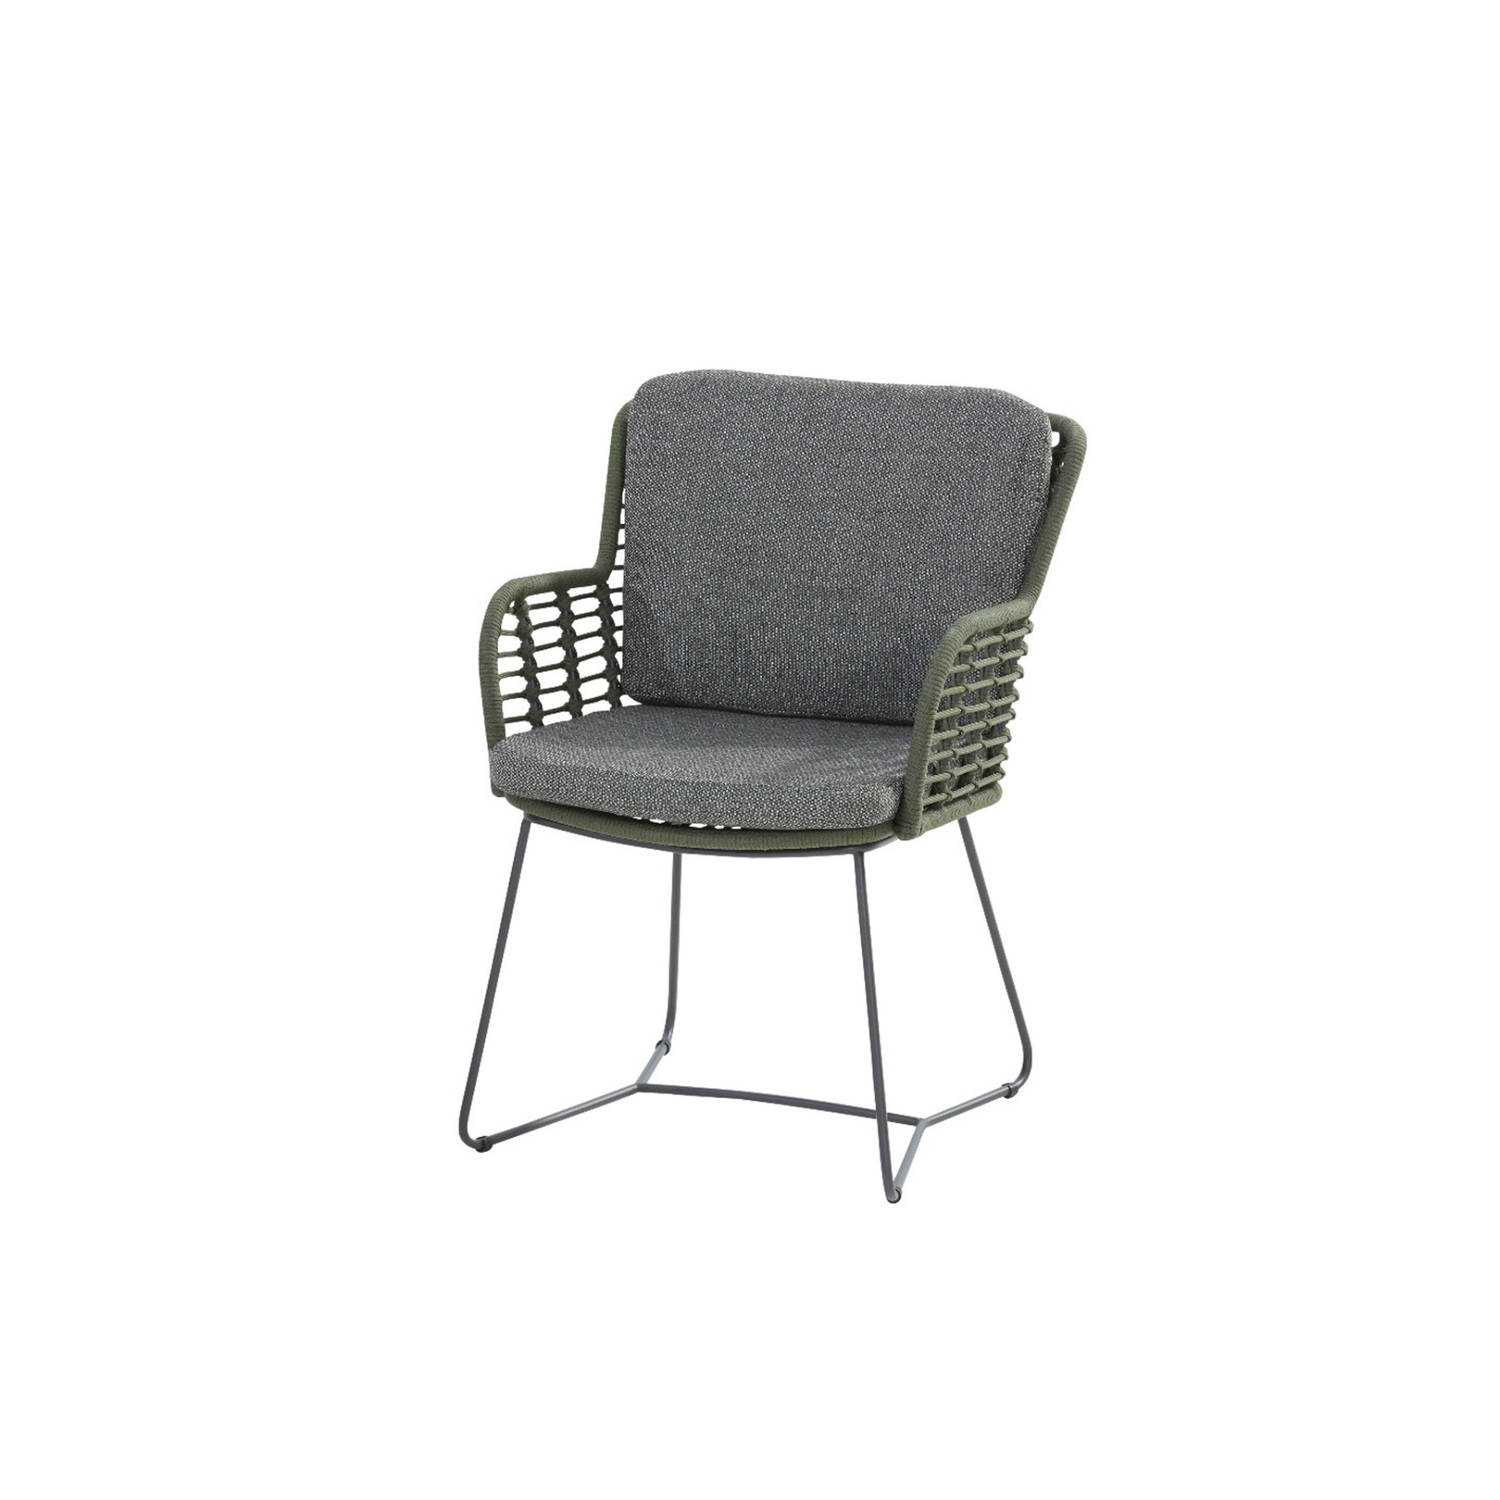 Fabrice dining chair Green-Anthracite